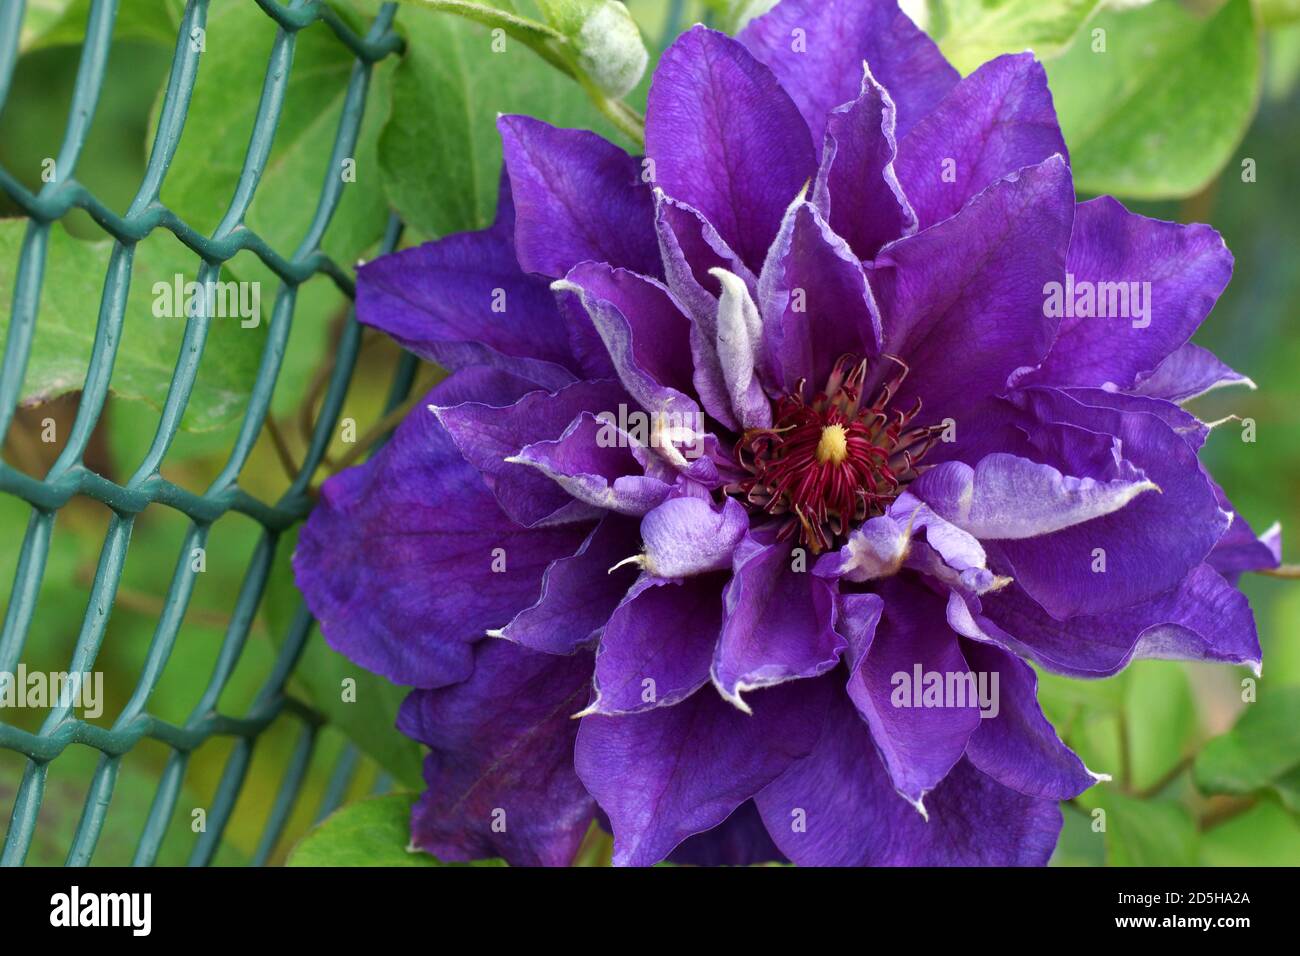 Clematis Shin-shigyoku. Beautiful double clematis flowers close-up. A plant in the garden, in the open. One flower close-up. Stock Photo